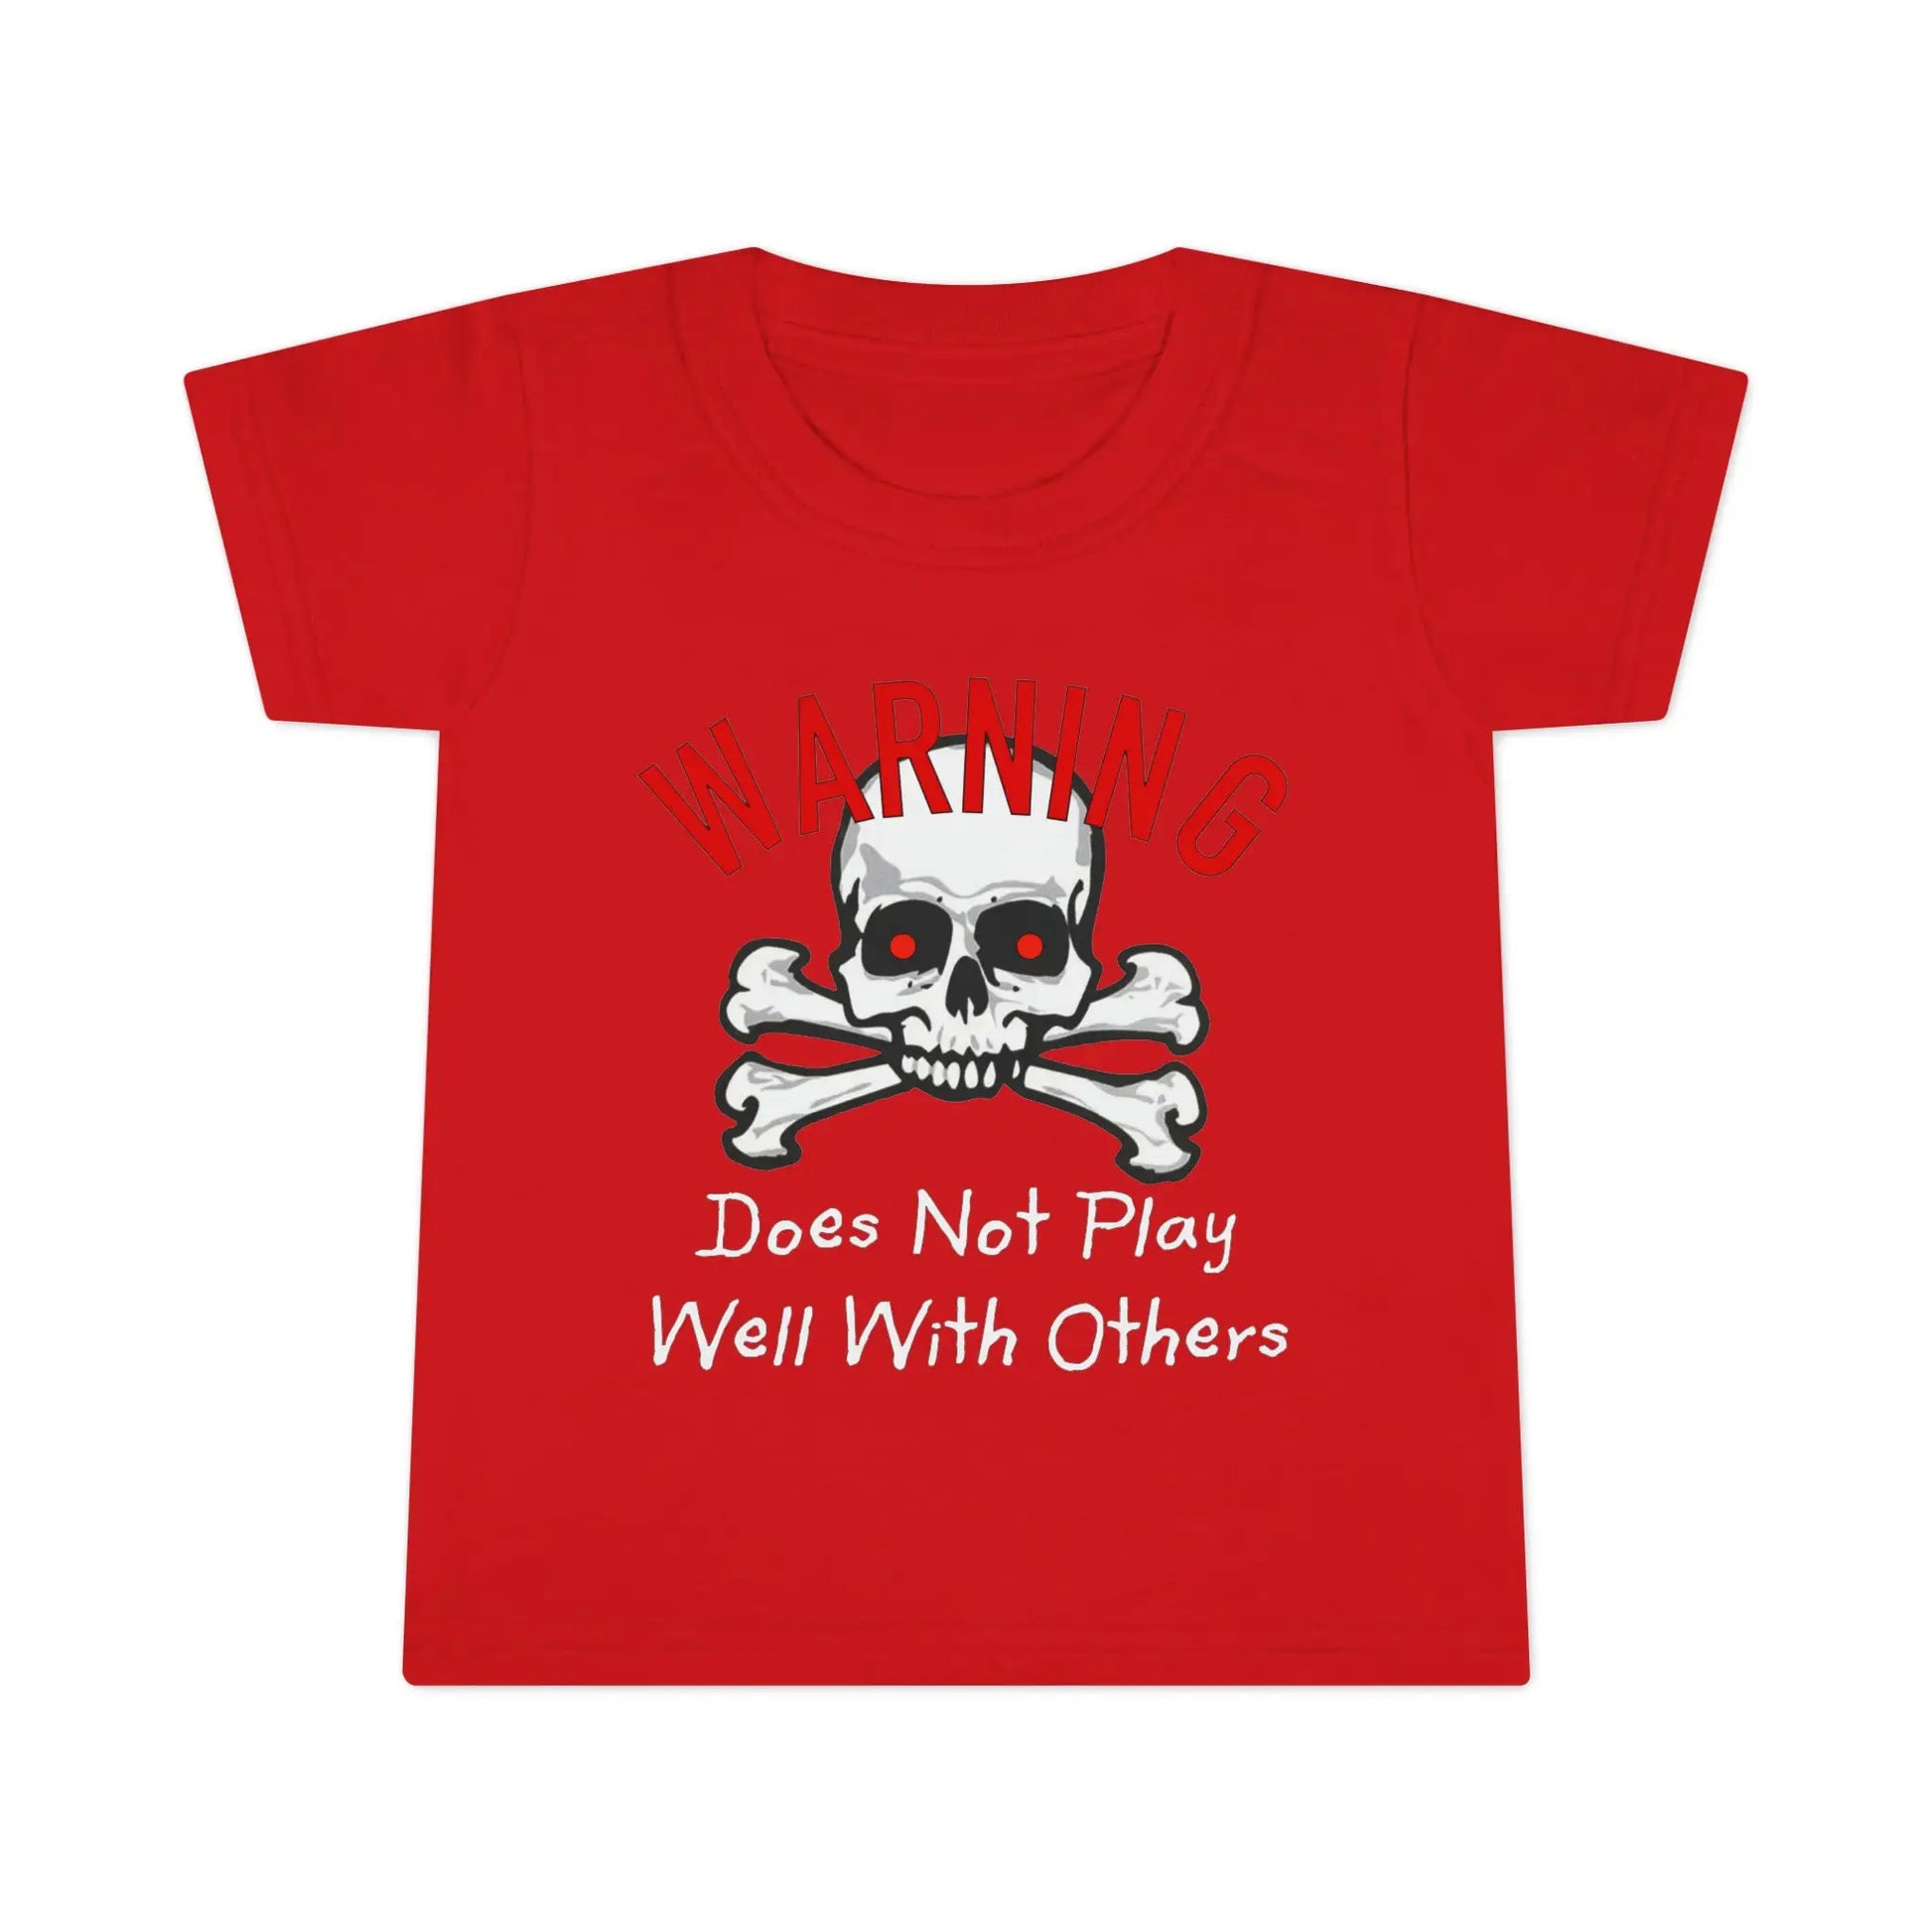 Warning Does Not Play Well With Others Toddler T-shirt - Wicked Tees